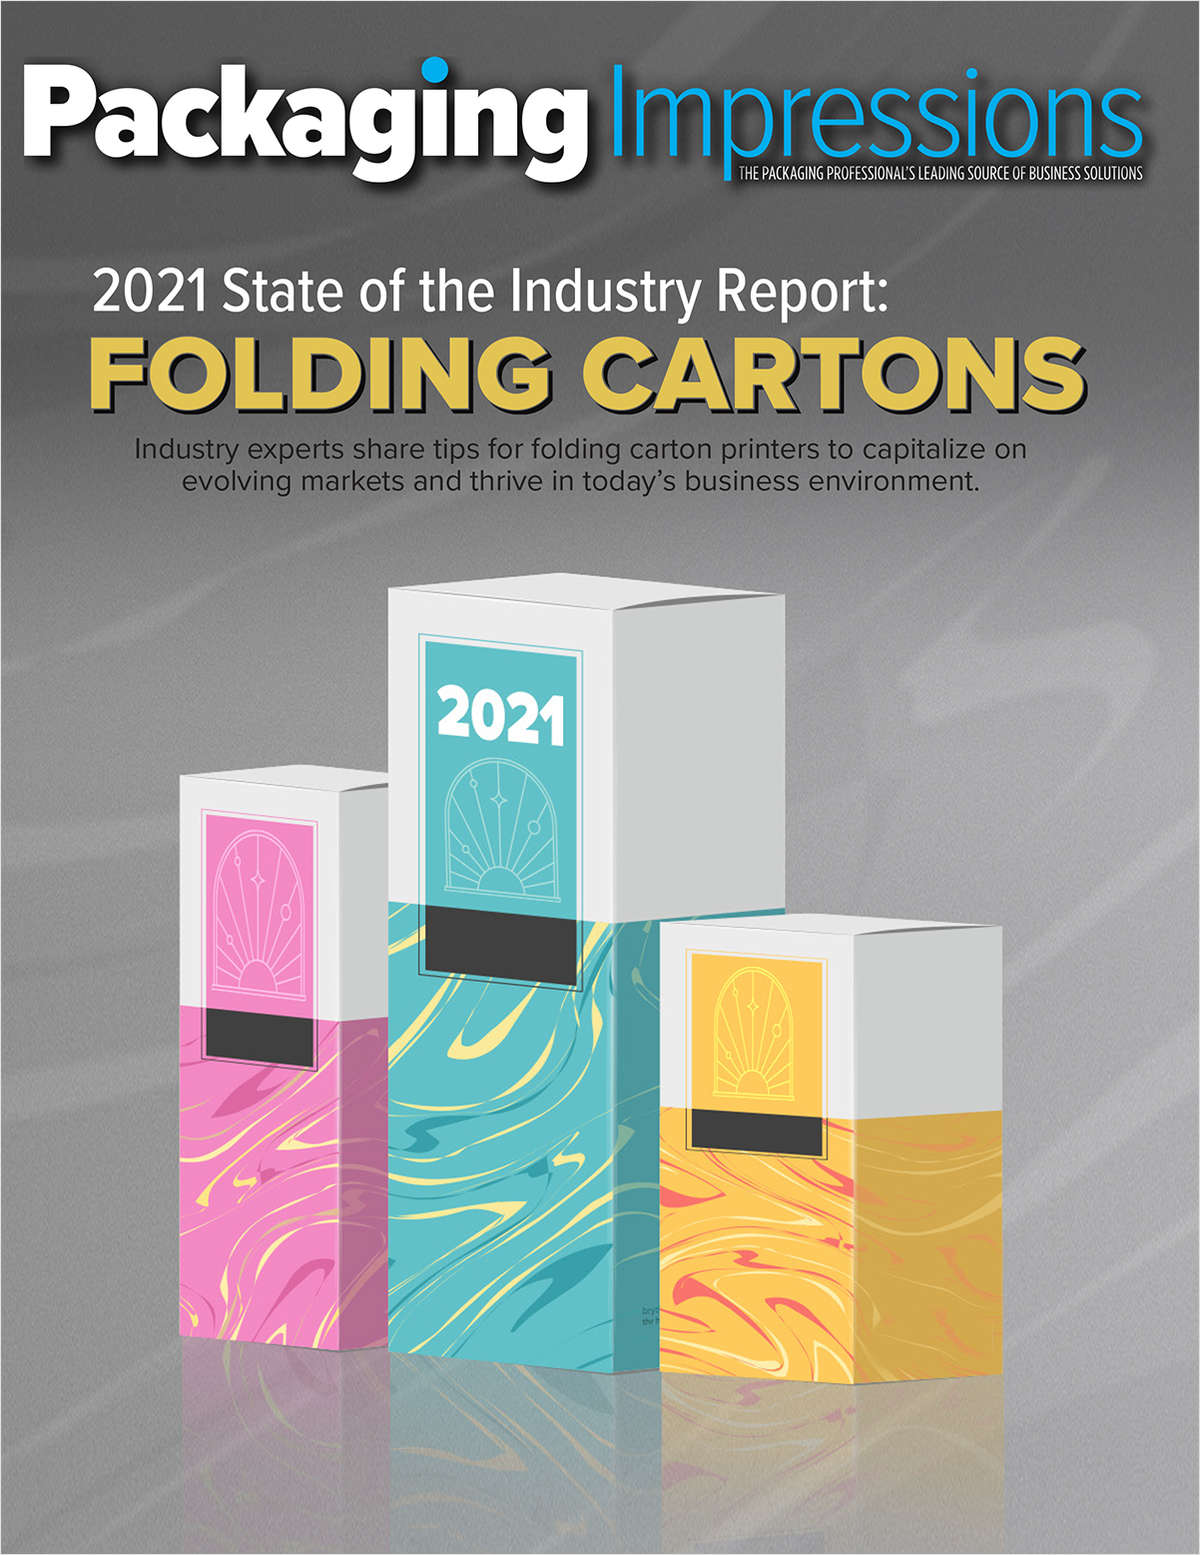 2021 State of the Industry Report: Folding Cartons